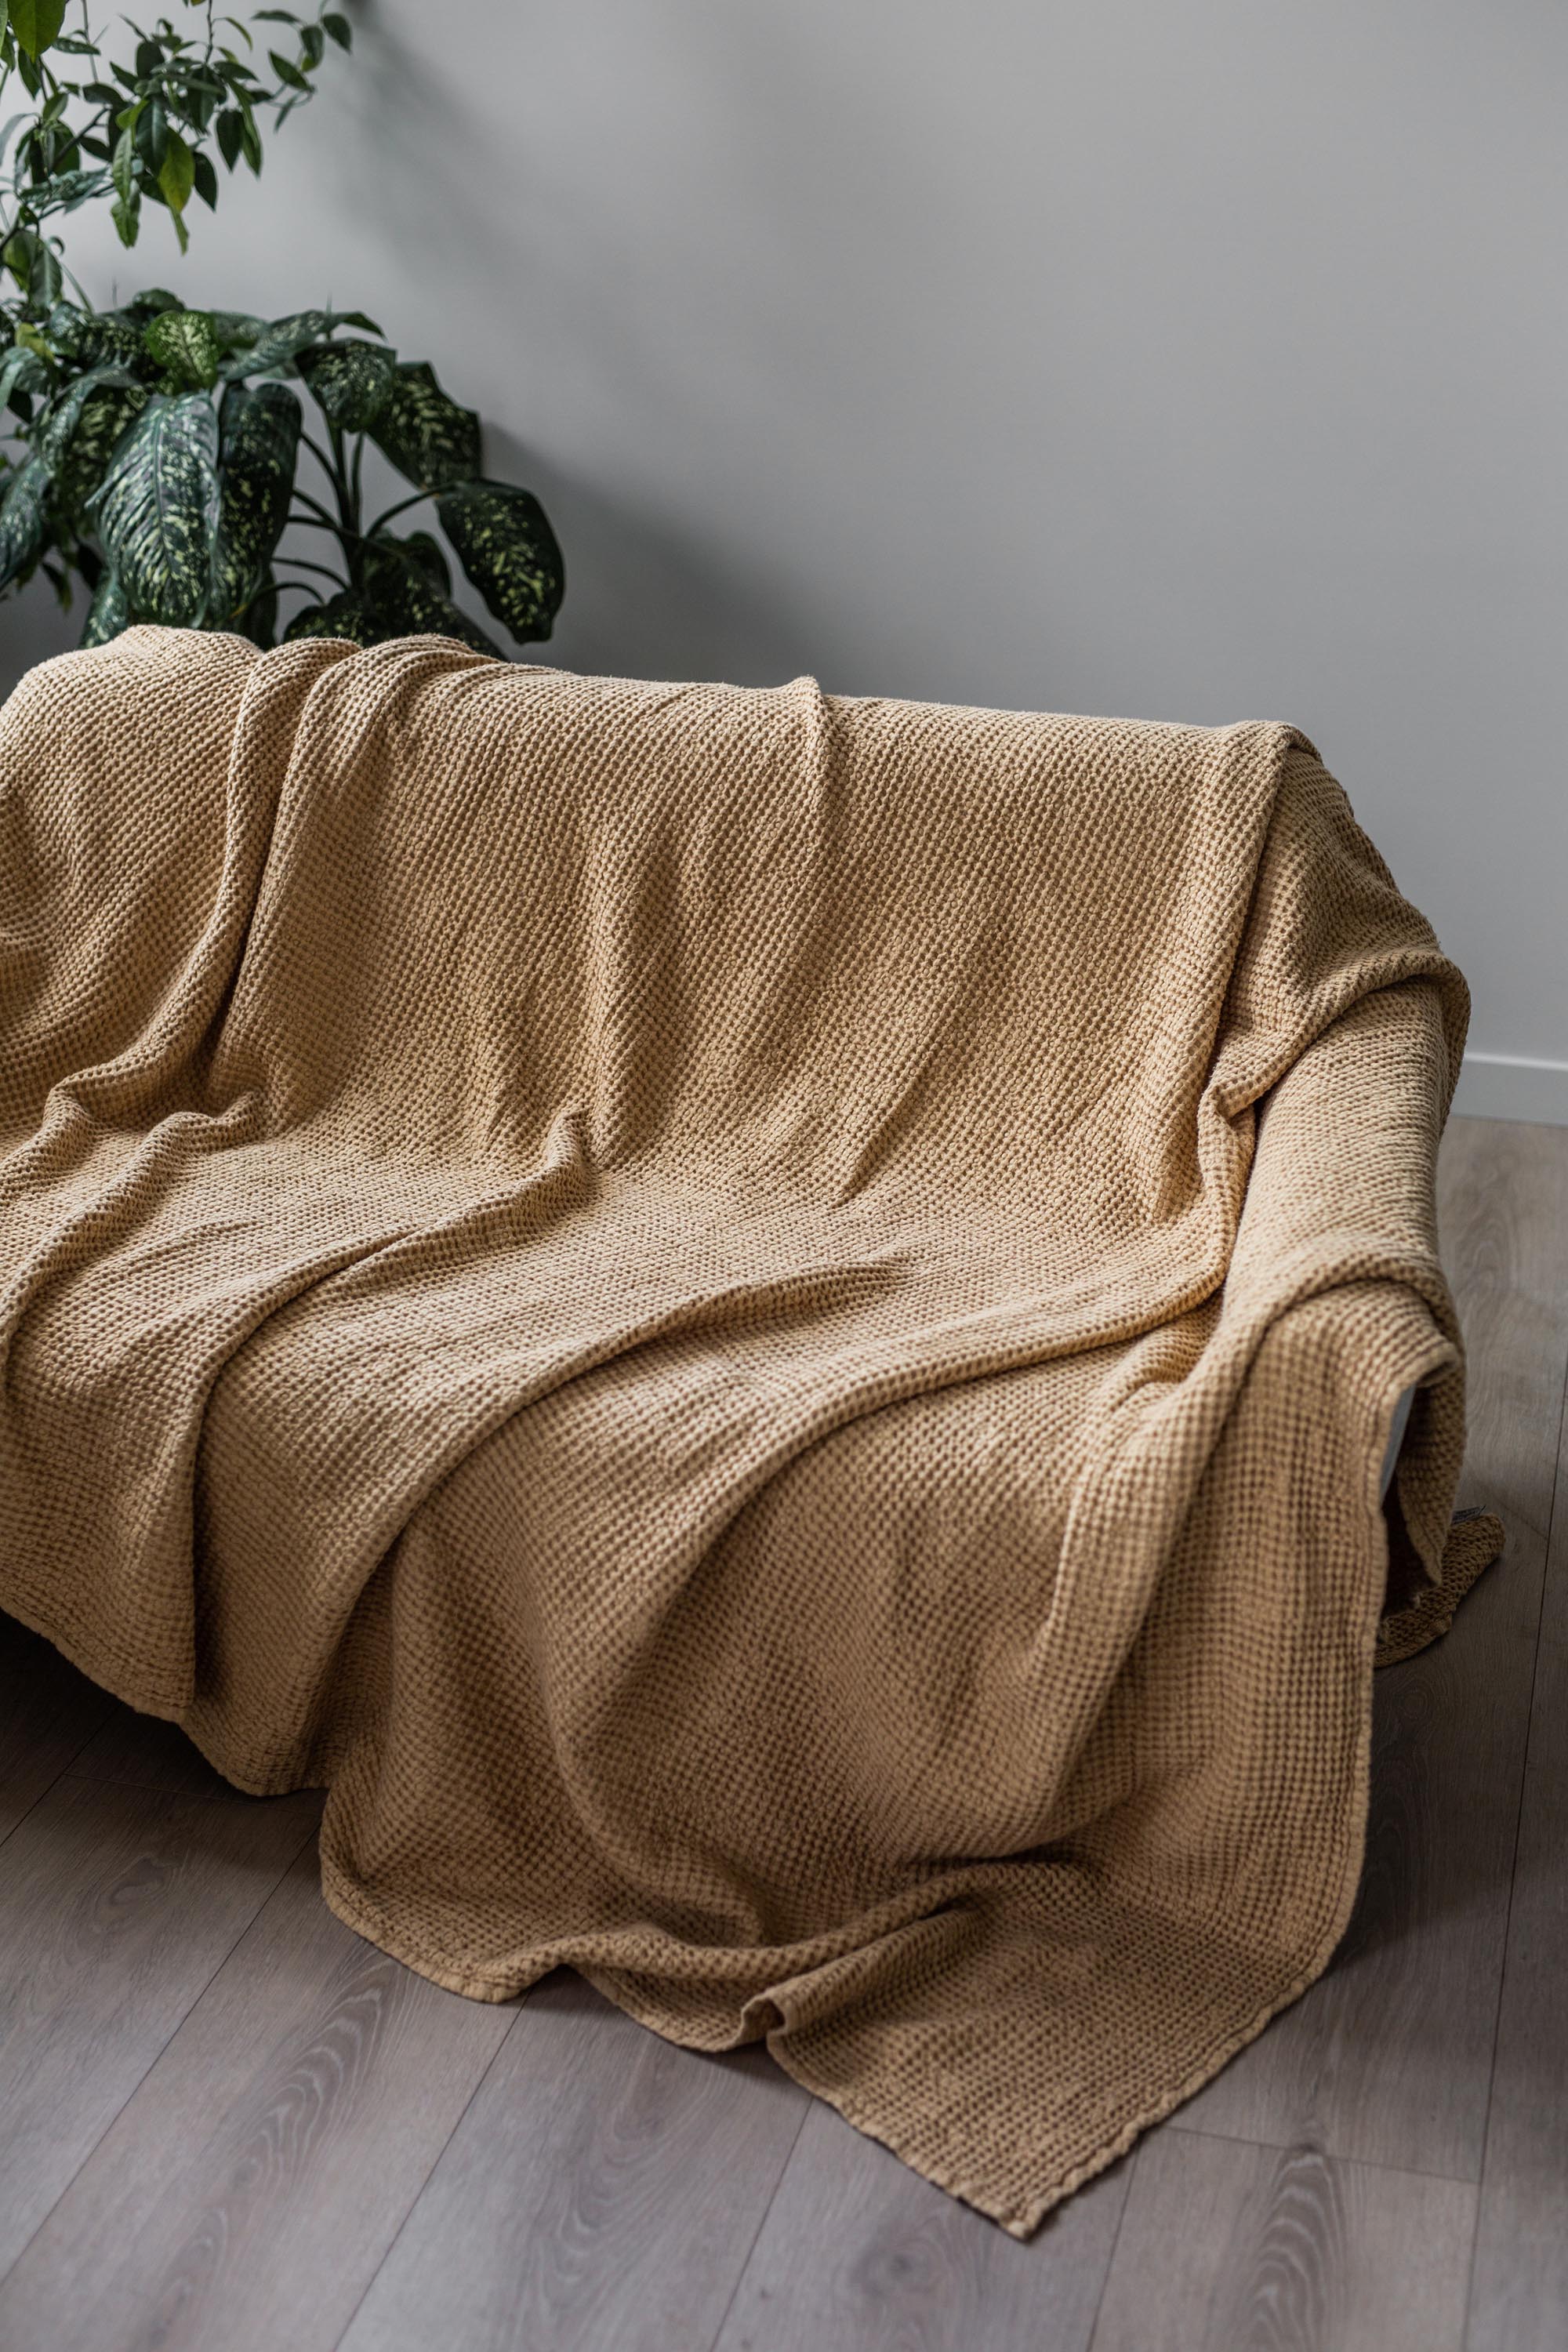 Side View Of Couch with Linen Waffle Blanket In Mustard By AmourLinen